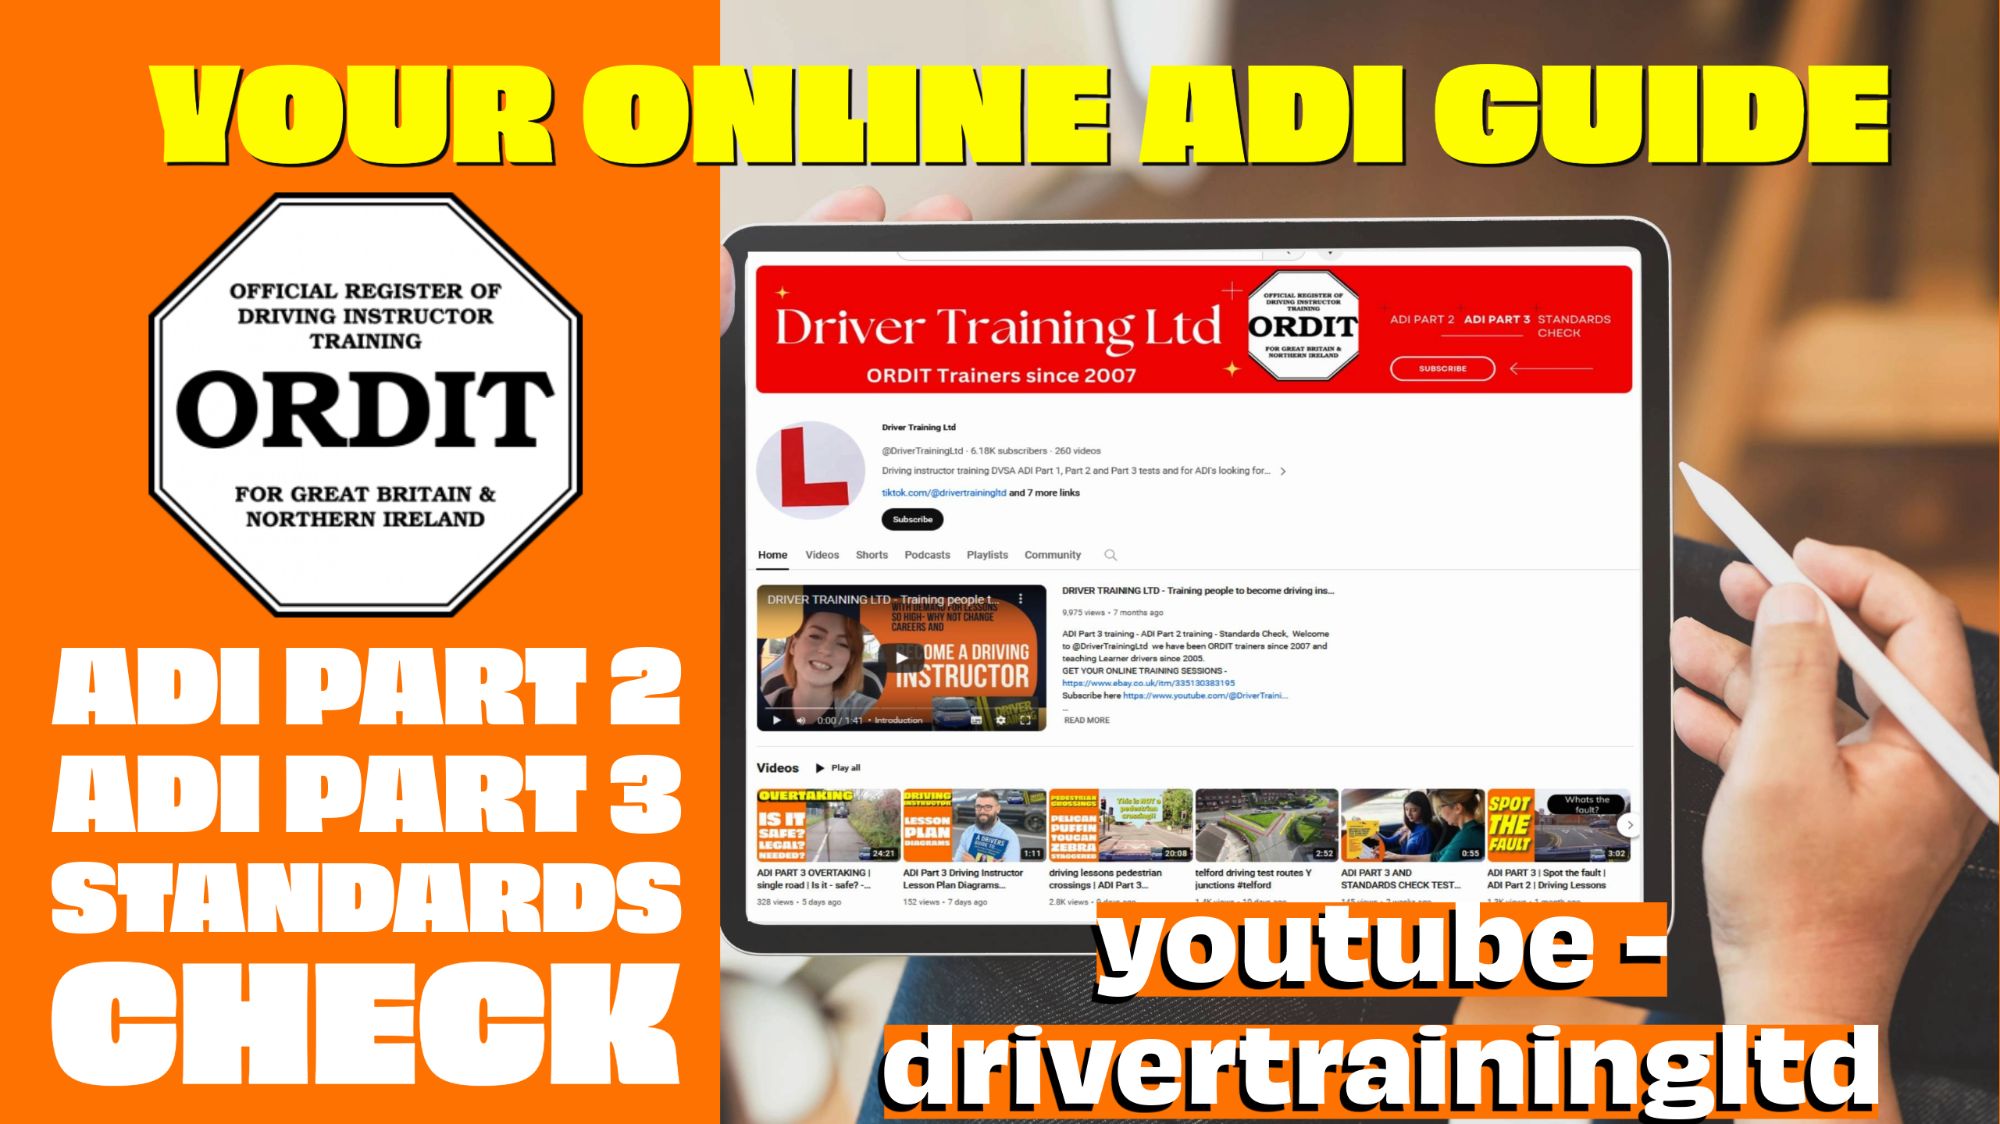 adi part 3 training youtube videos with driver training ltd for adi part 2, adi part 3, adi standards check test